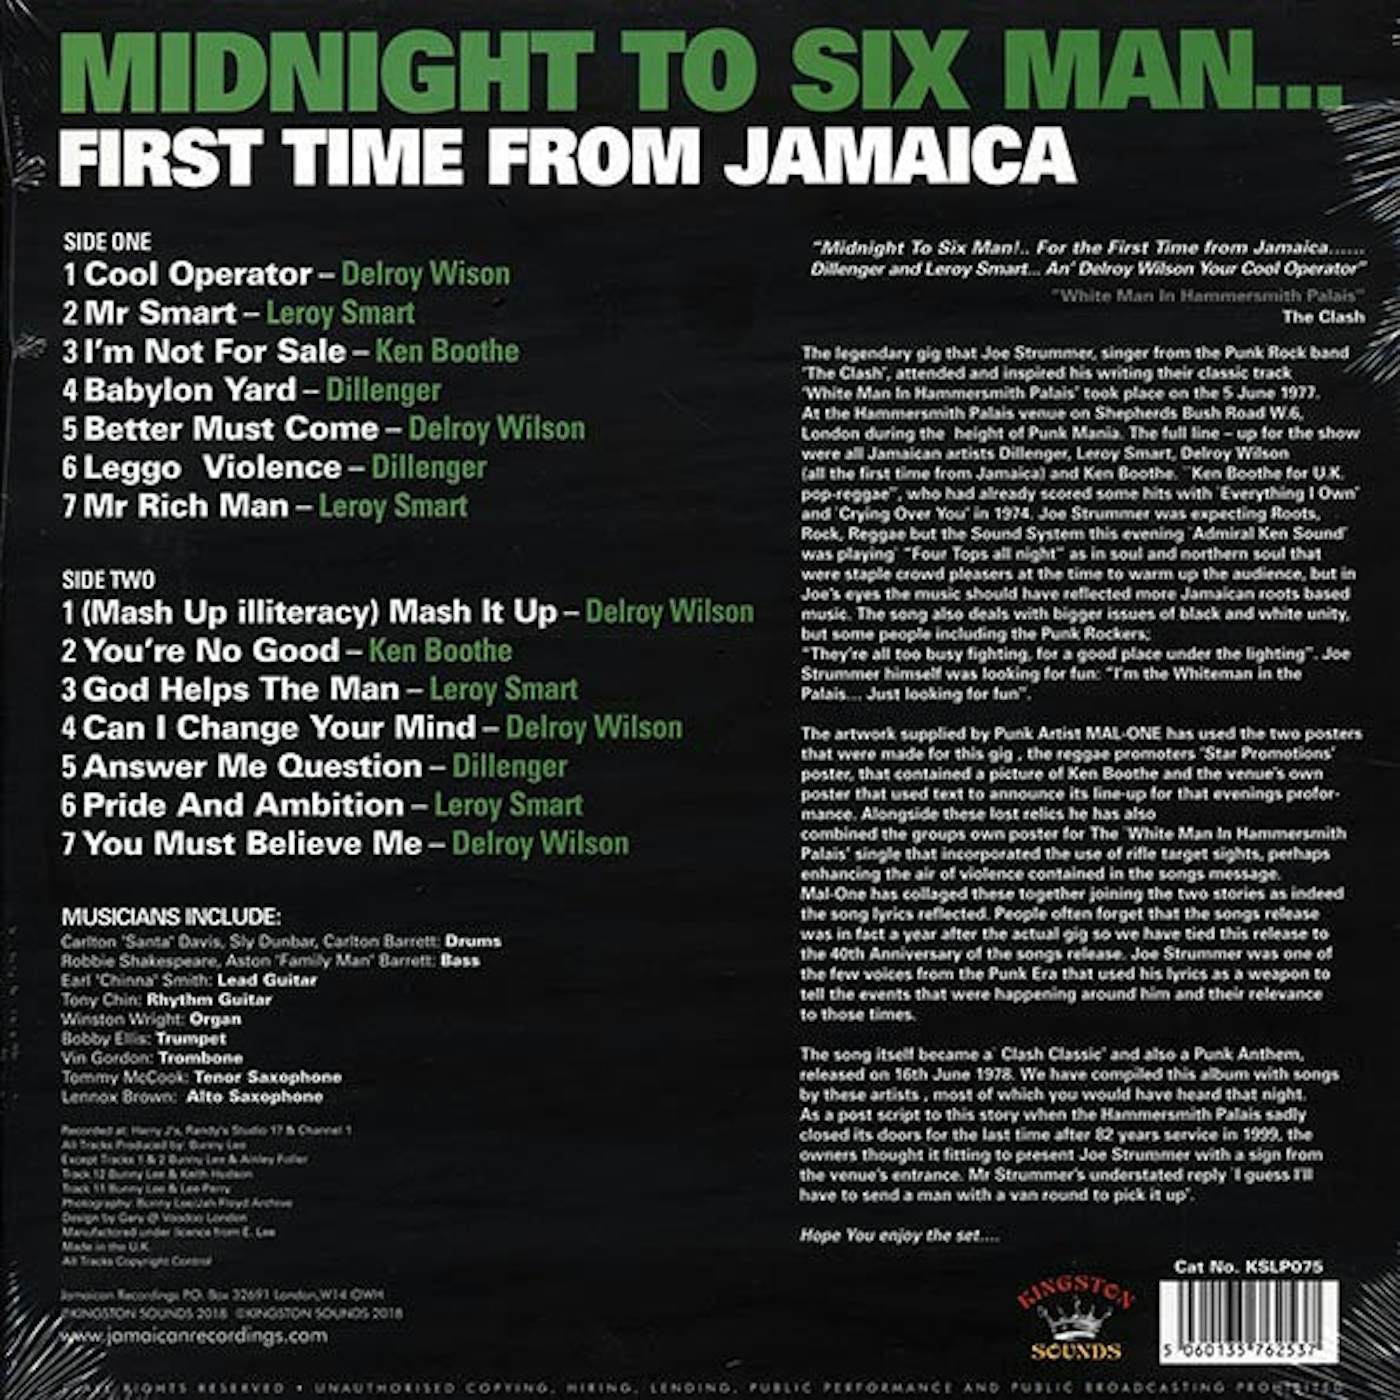 Dillinger, Delroy Wilson, Ken Boothe, Leroy Smart,  Etc.  LP -  Midnight To Six Man: First Time From Jamaica (180g) (Vinyl)